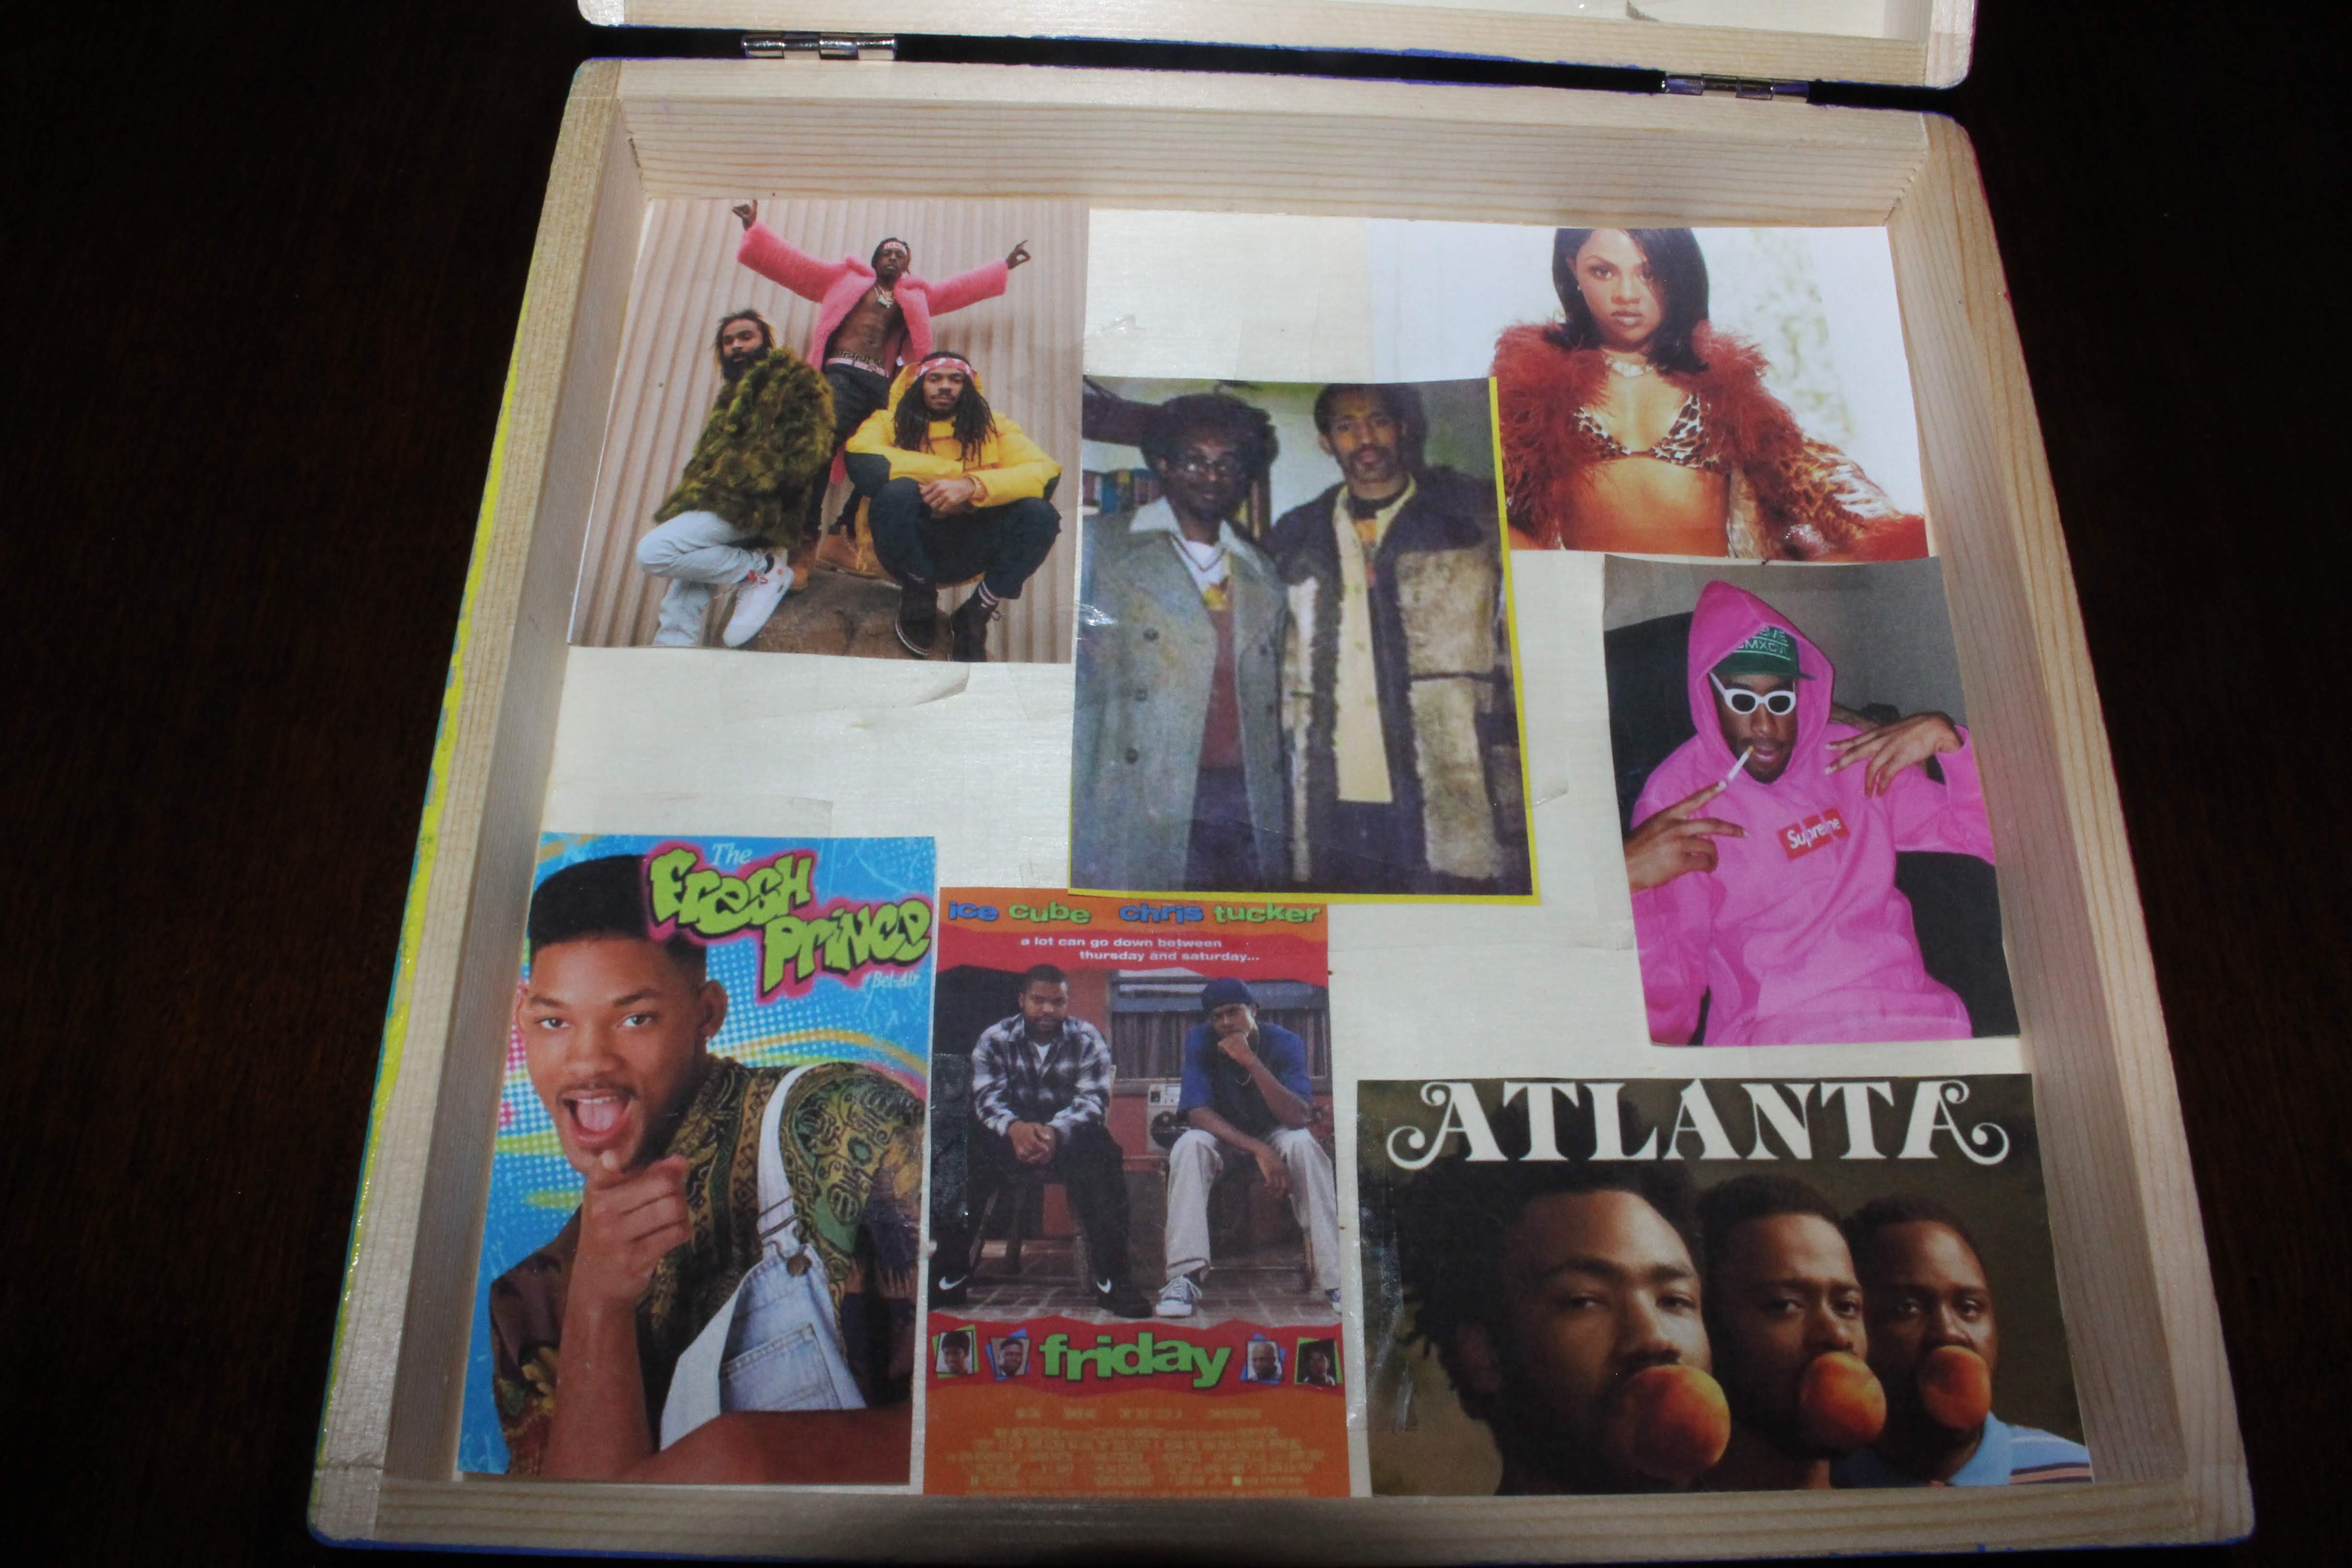 The bottom part of the inside of the box. It’s a brief summary of some of my favorite musicians, tv shows, and movies that come from hip-hop culture. In the center is an image of the ‘founders of hip-hop’.